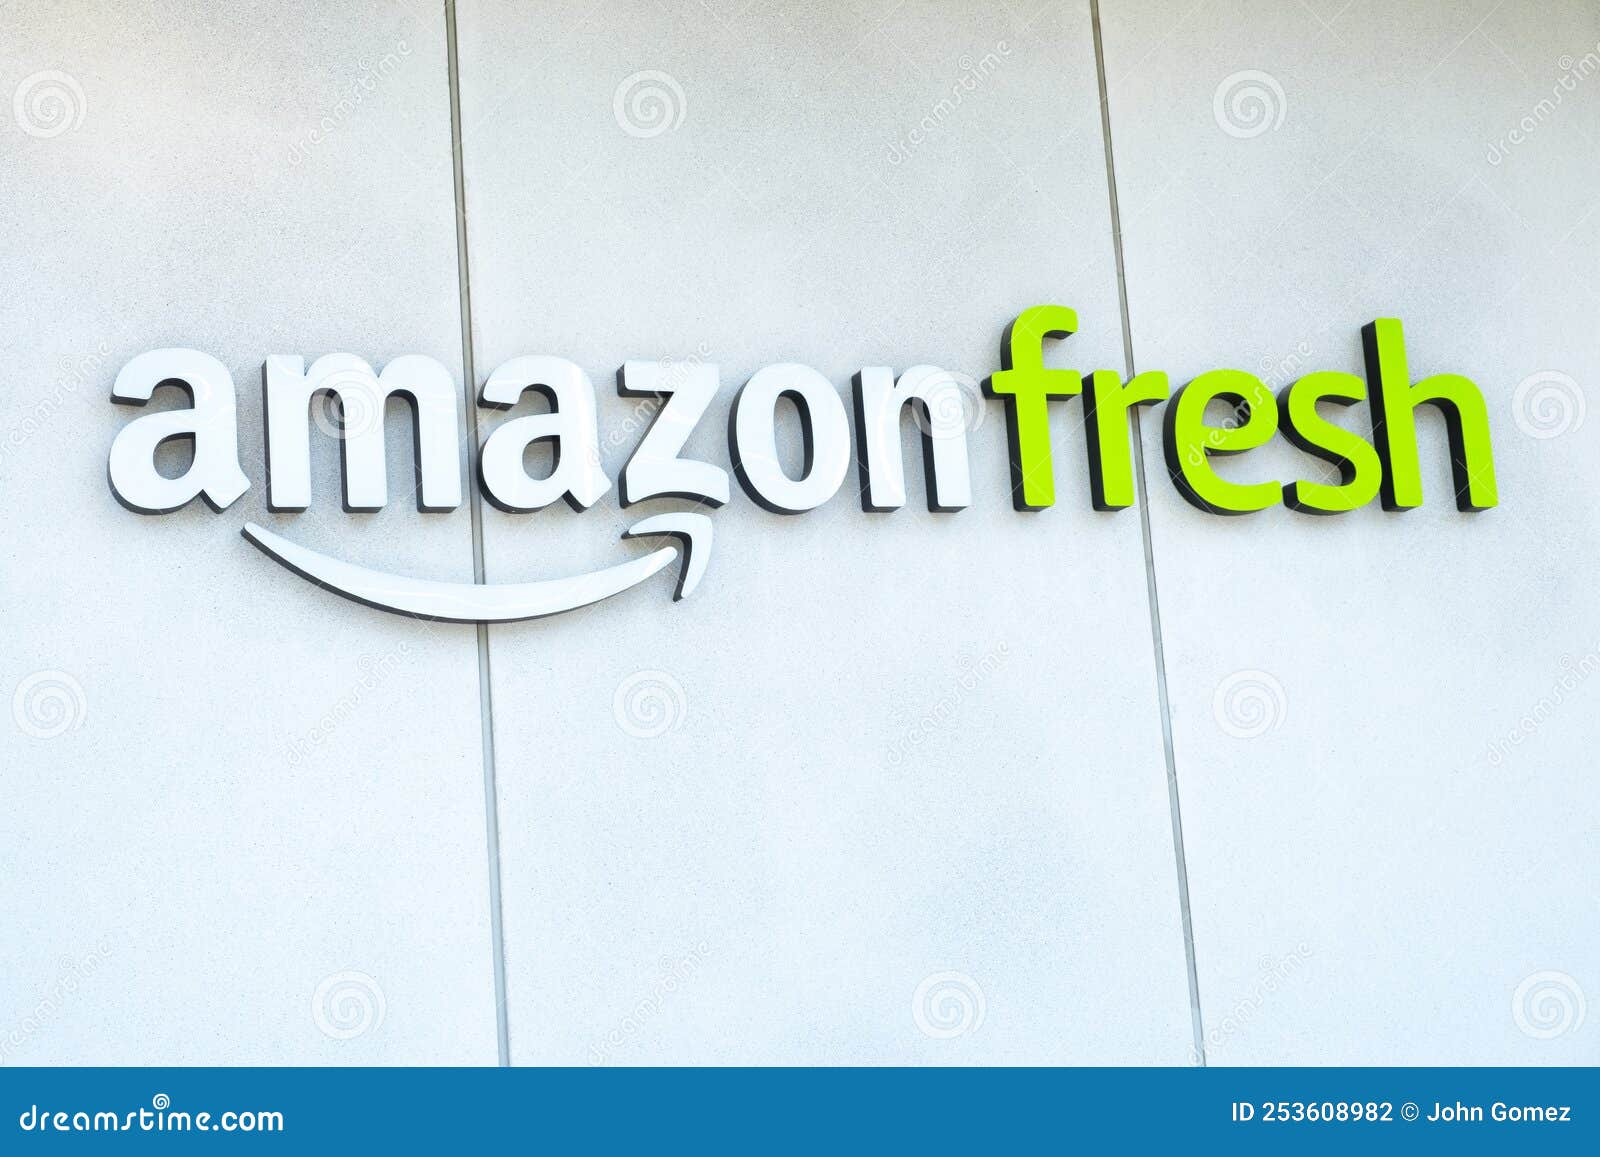 Amazon Fresh brand logo on building exterior. Canary Wharf, London, UK. 11th August 2022. Low angle view of Amazon Fresh brand logo on building exterior located at Canary Wharf.